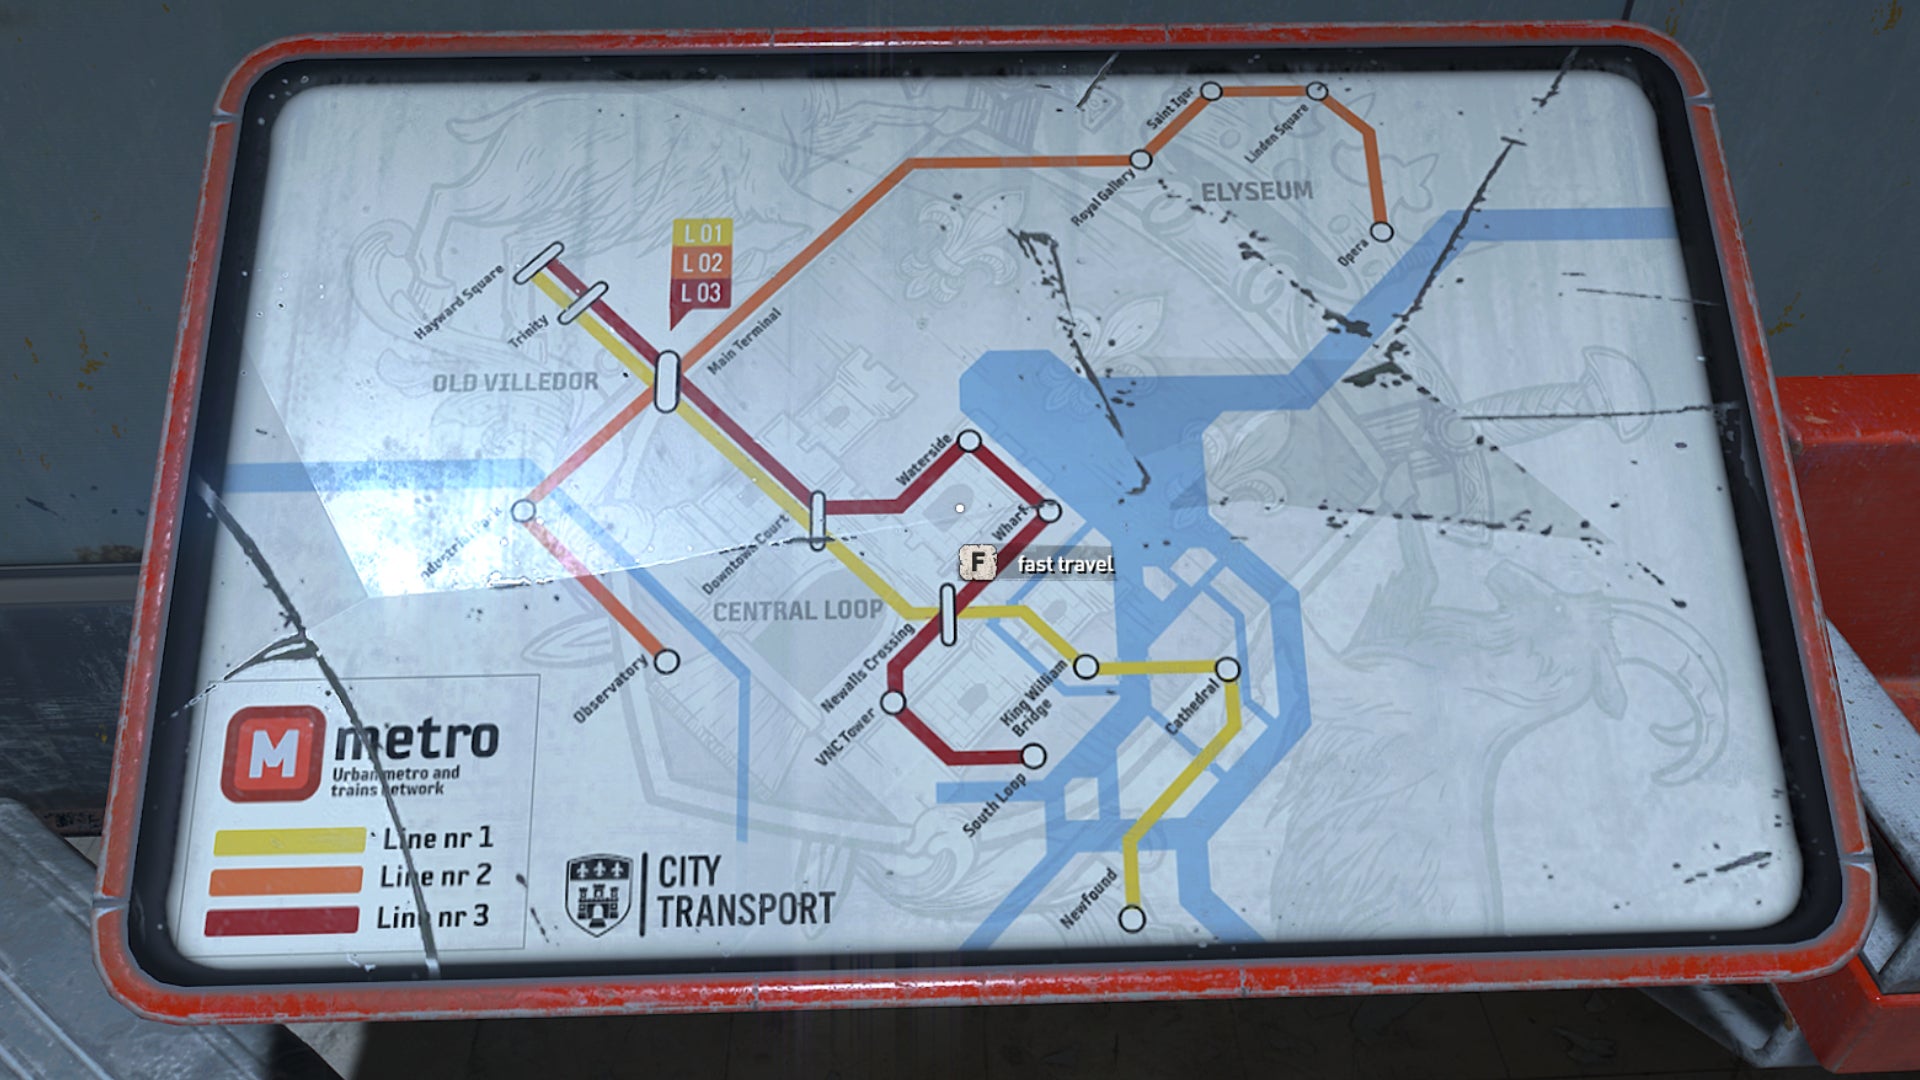 A metro station map in Dying Light 2. The player can interact with this map to fast travel to a new location.